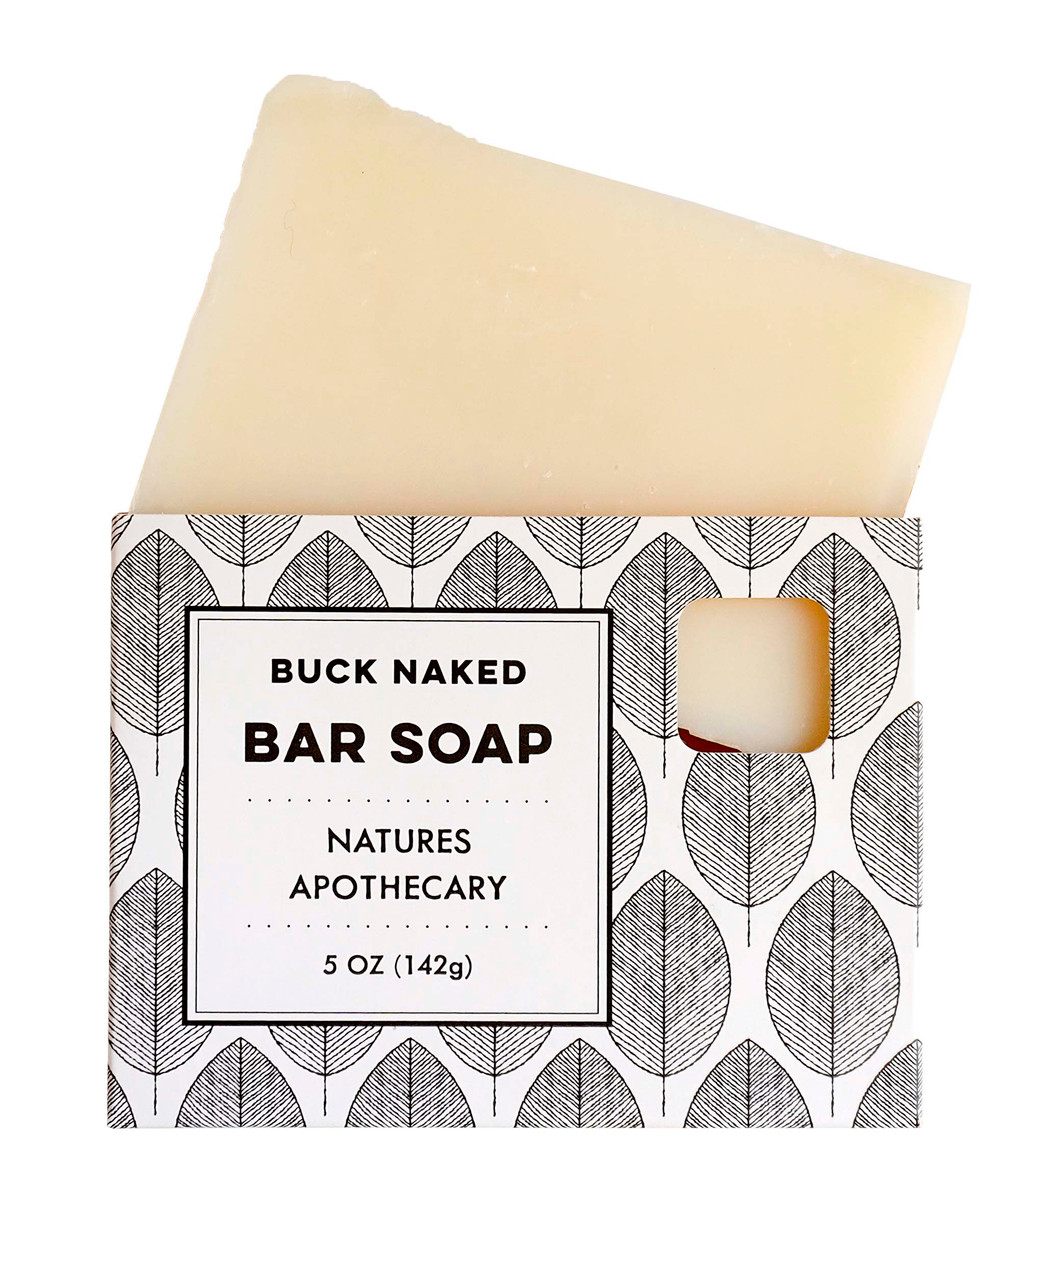 DAYSPA Body Basics Buck Naked (unscented) Eco Friendly, 100% Vegan, Cold Processed Castile Soap, Handmade in USA in Small Batches